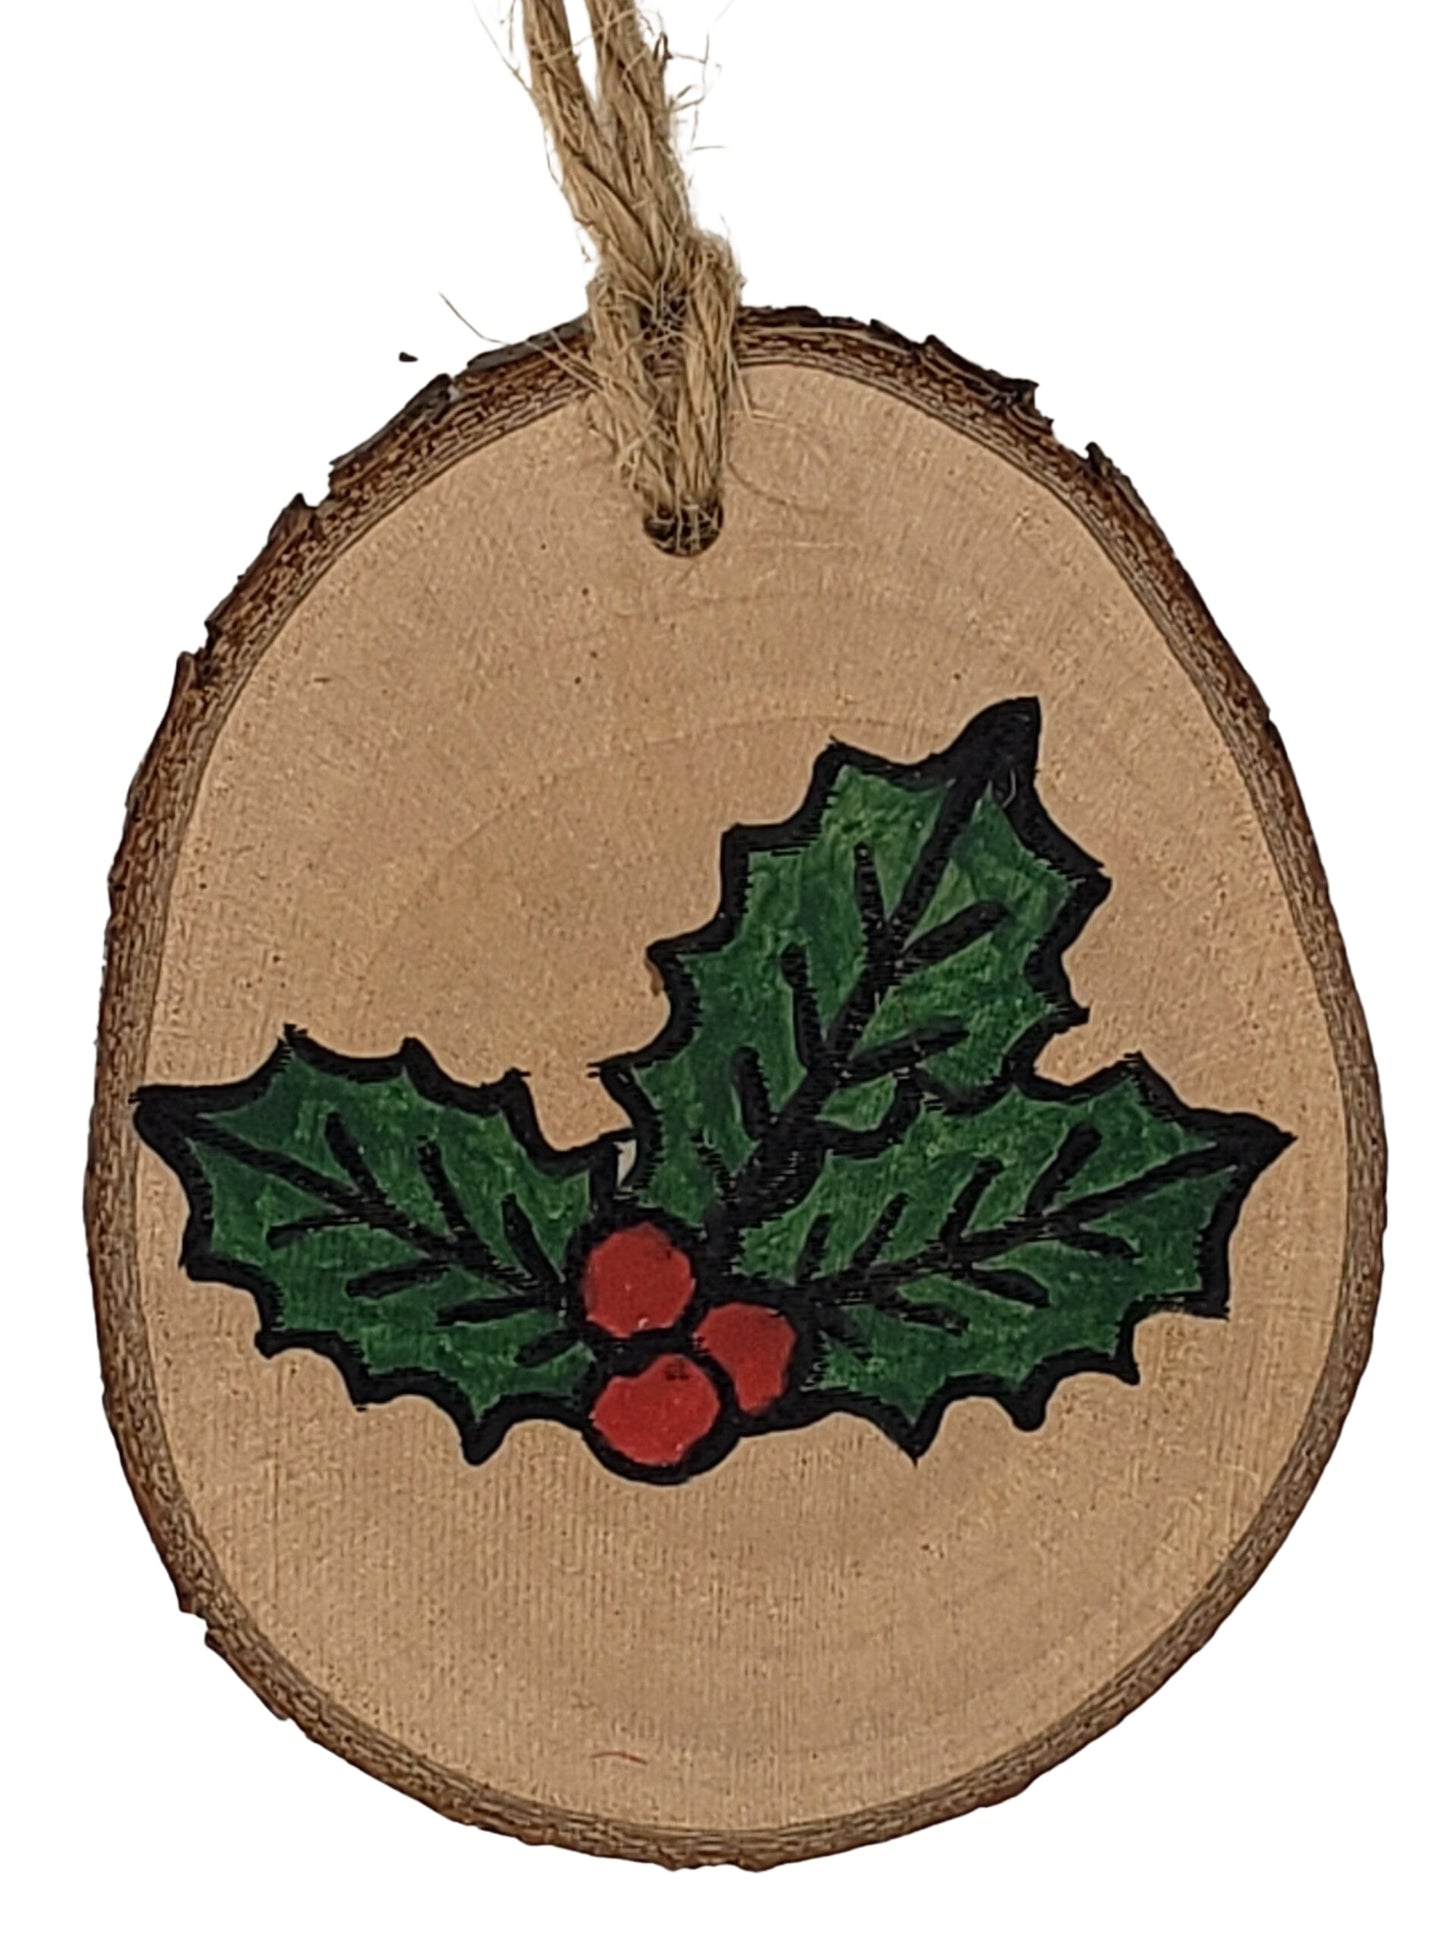 Natures Christmas- wood burned and hand painted holly leaves Christmas tree ornament on maple wood